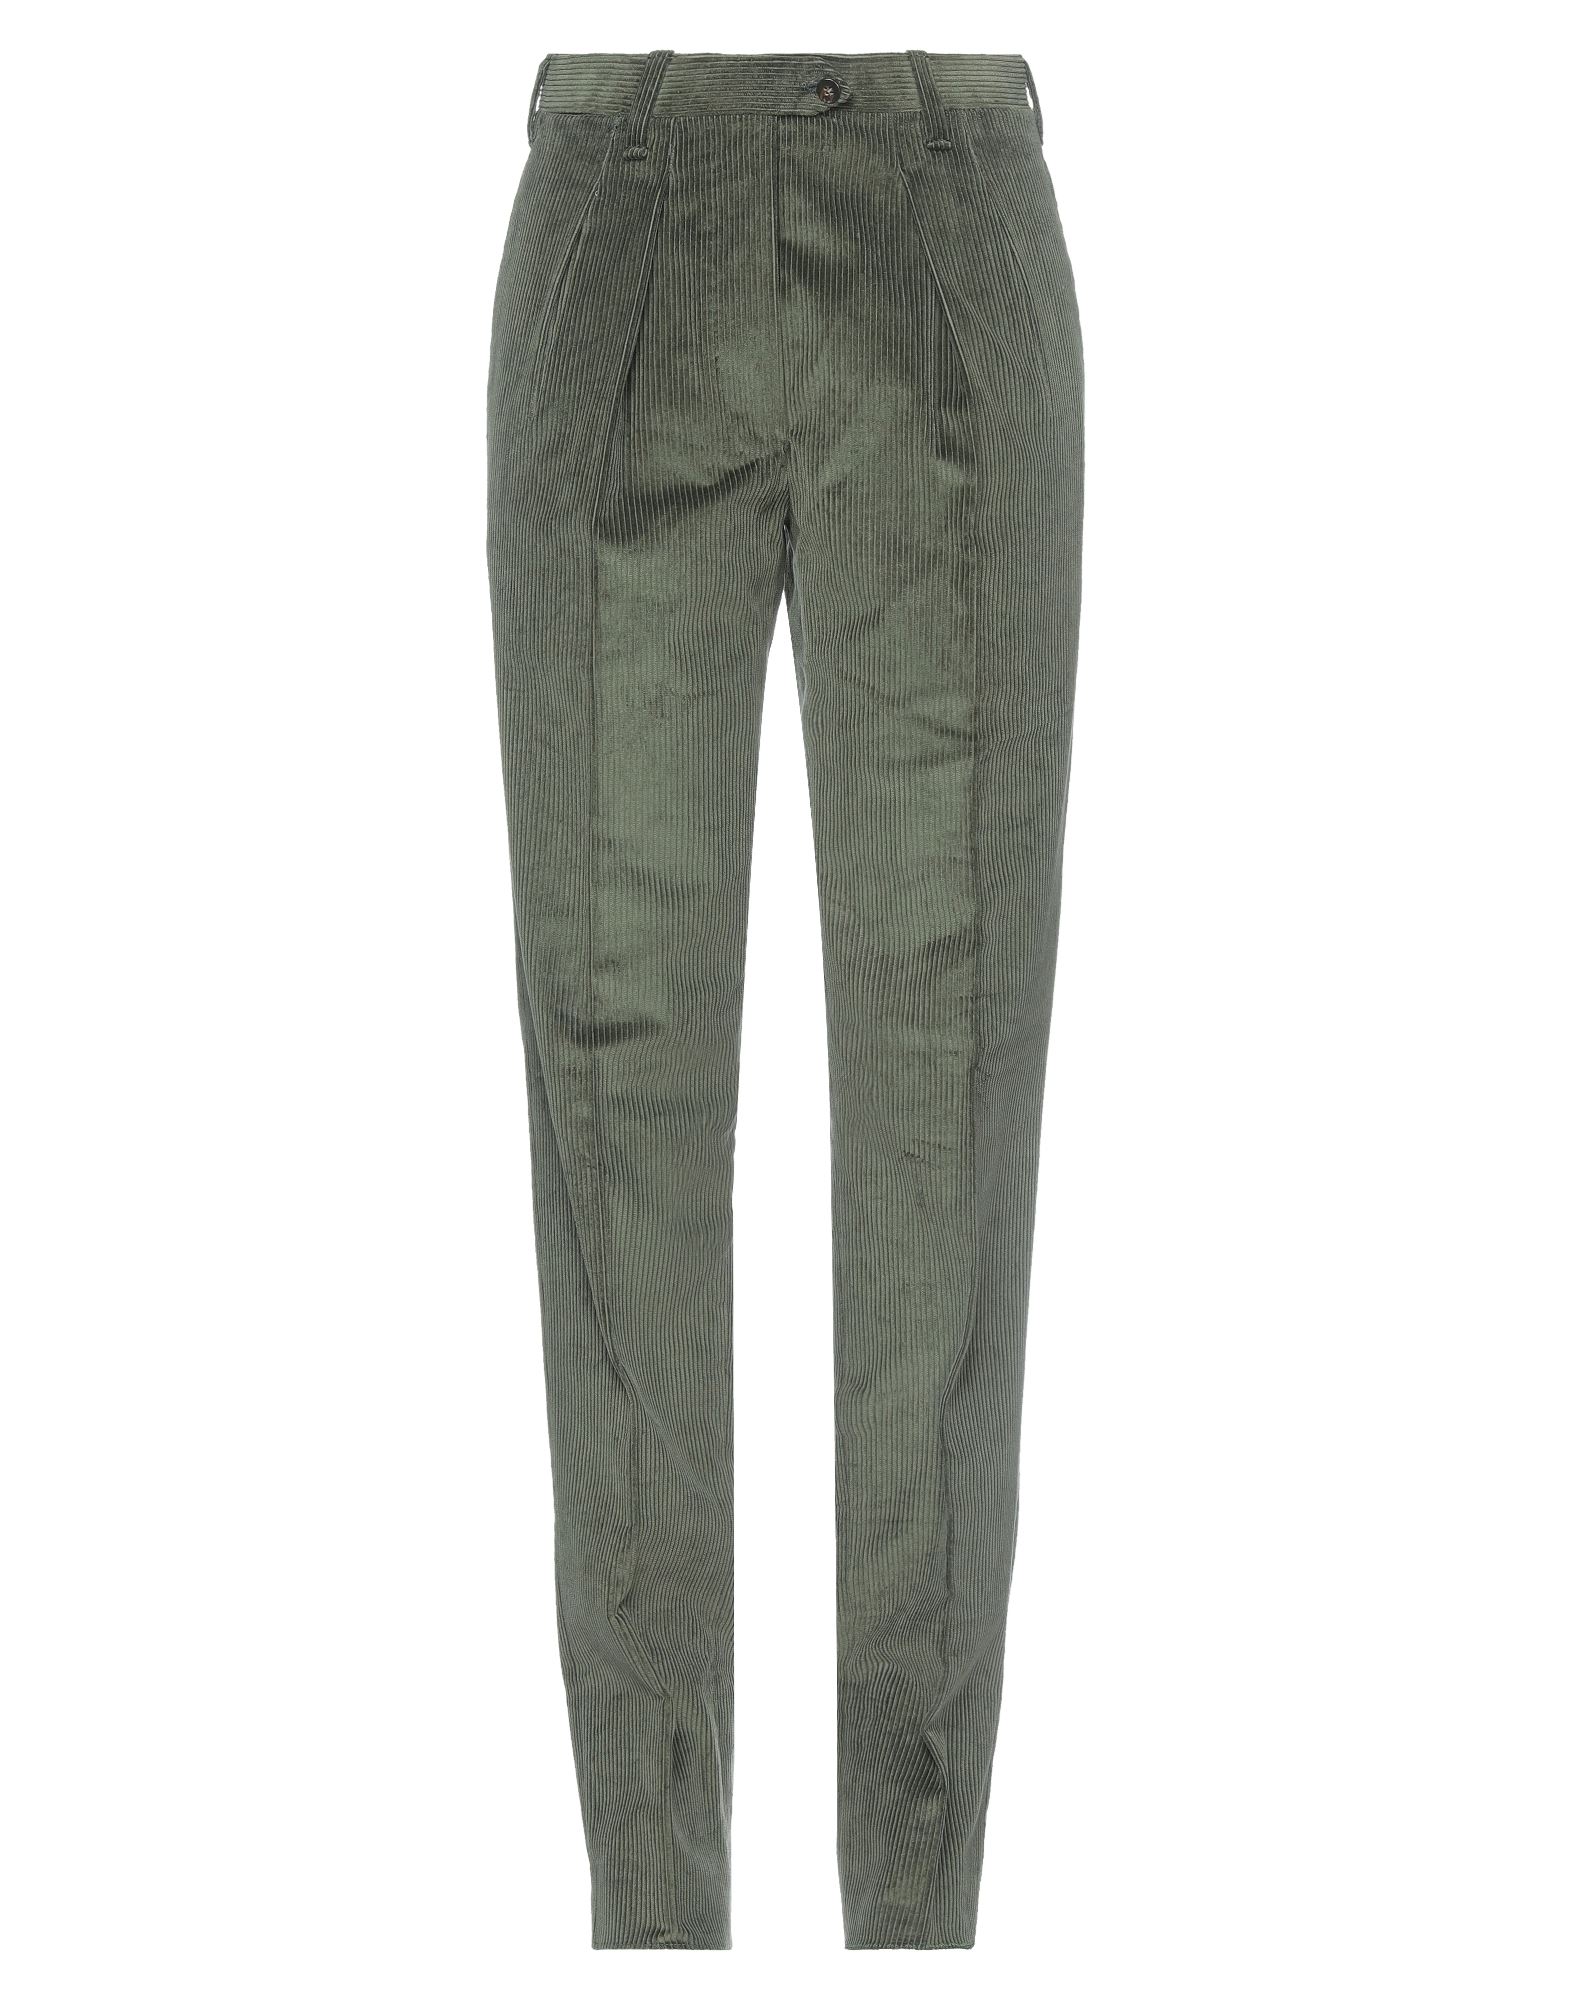 GIULIVA HERITAGE COLLECTION Pants